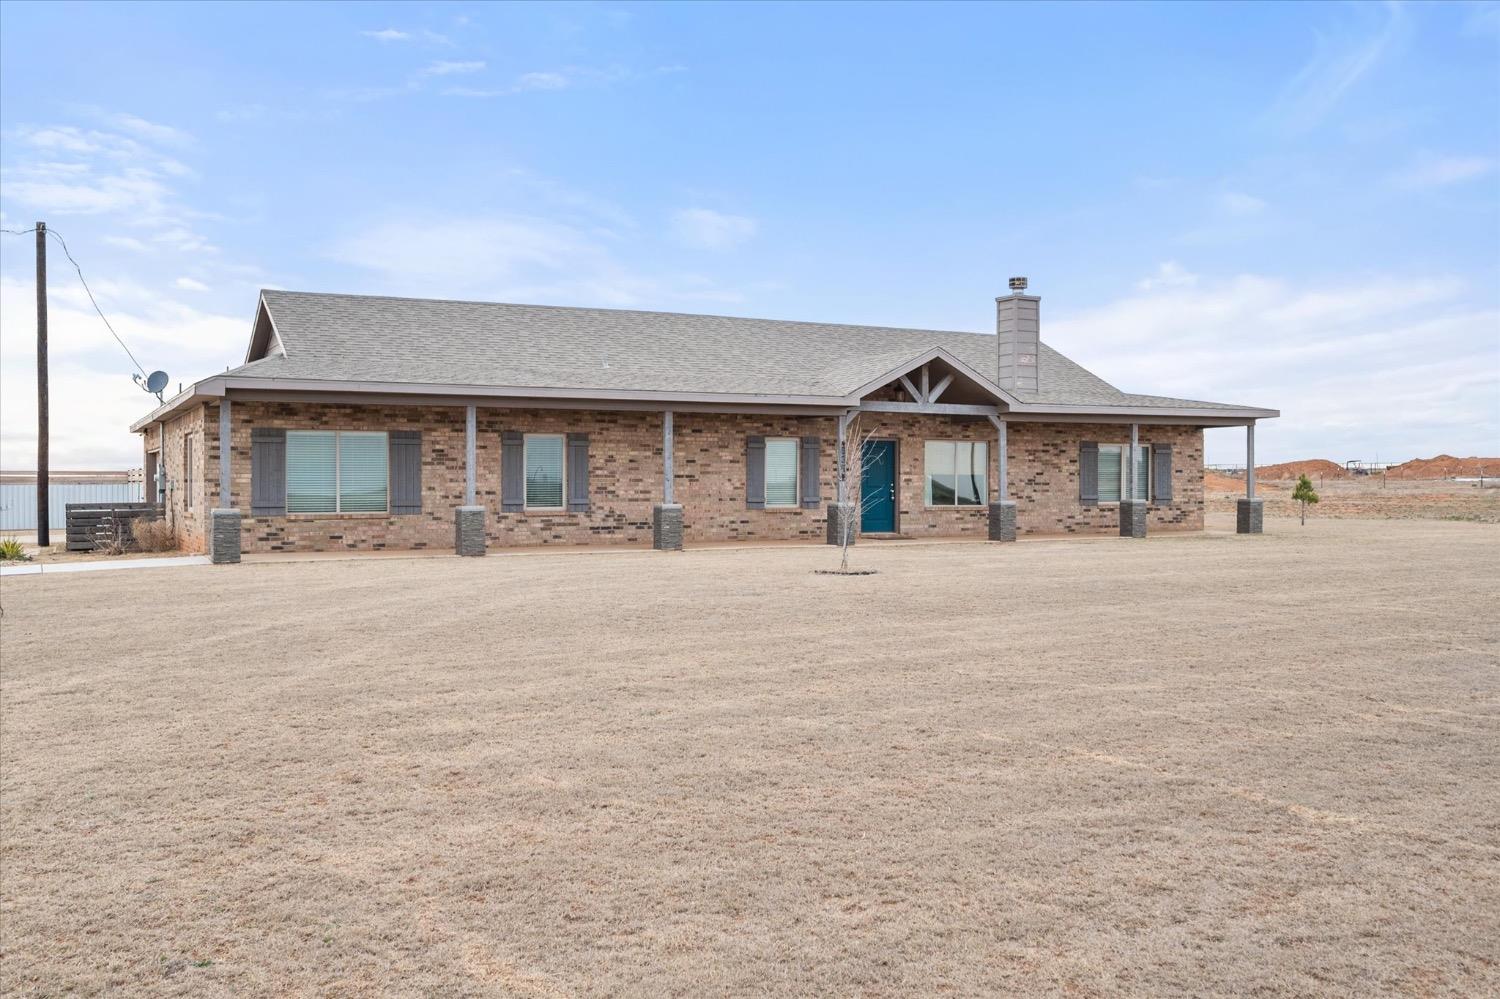 If big skies and room to roam are what you're looking for, this is the place for you! This beautiful 4 bedroom, 3 bathroom home in New Home ISD sits on 10 unrestricted acres, a 2-car detached garage/shop, and the best views of West Texas sunsets. Two living areas and a huge laundry room. Enclosed sunroom with swim spa. Fenced backyard. Ready to be your next home. Book your private showing today!